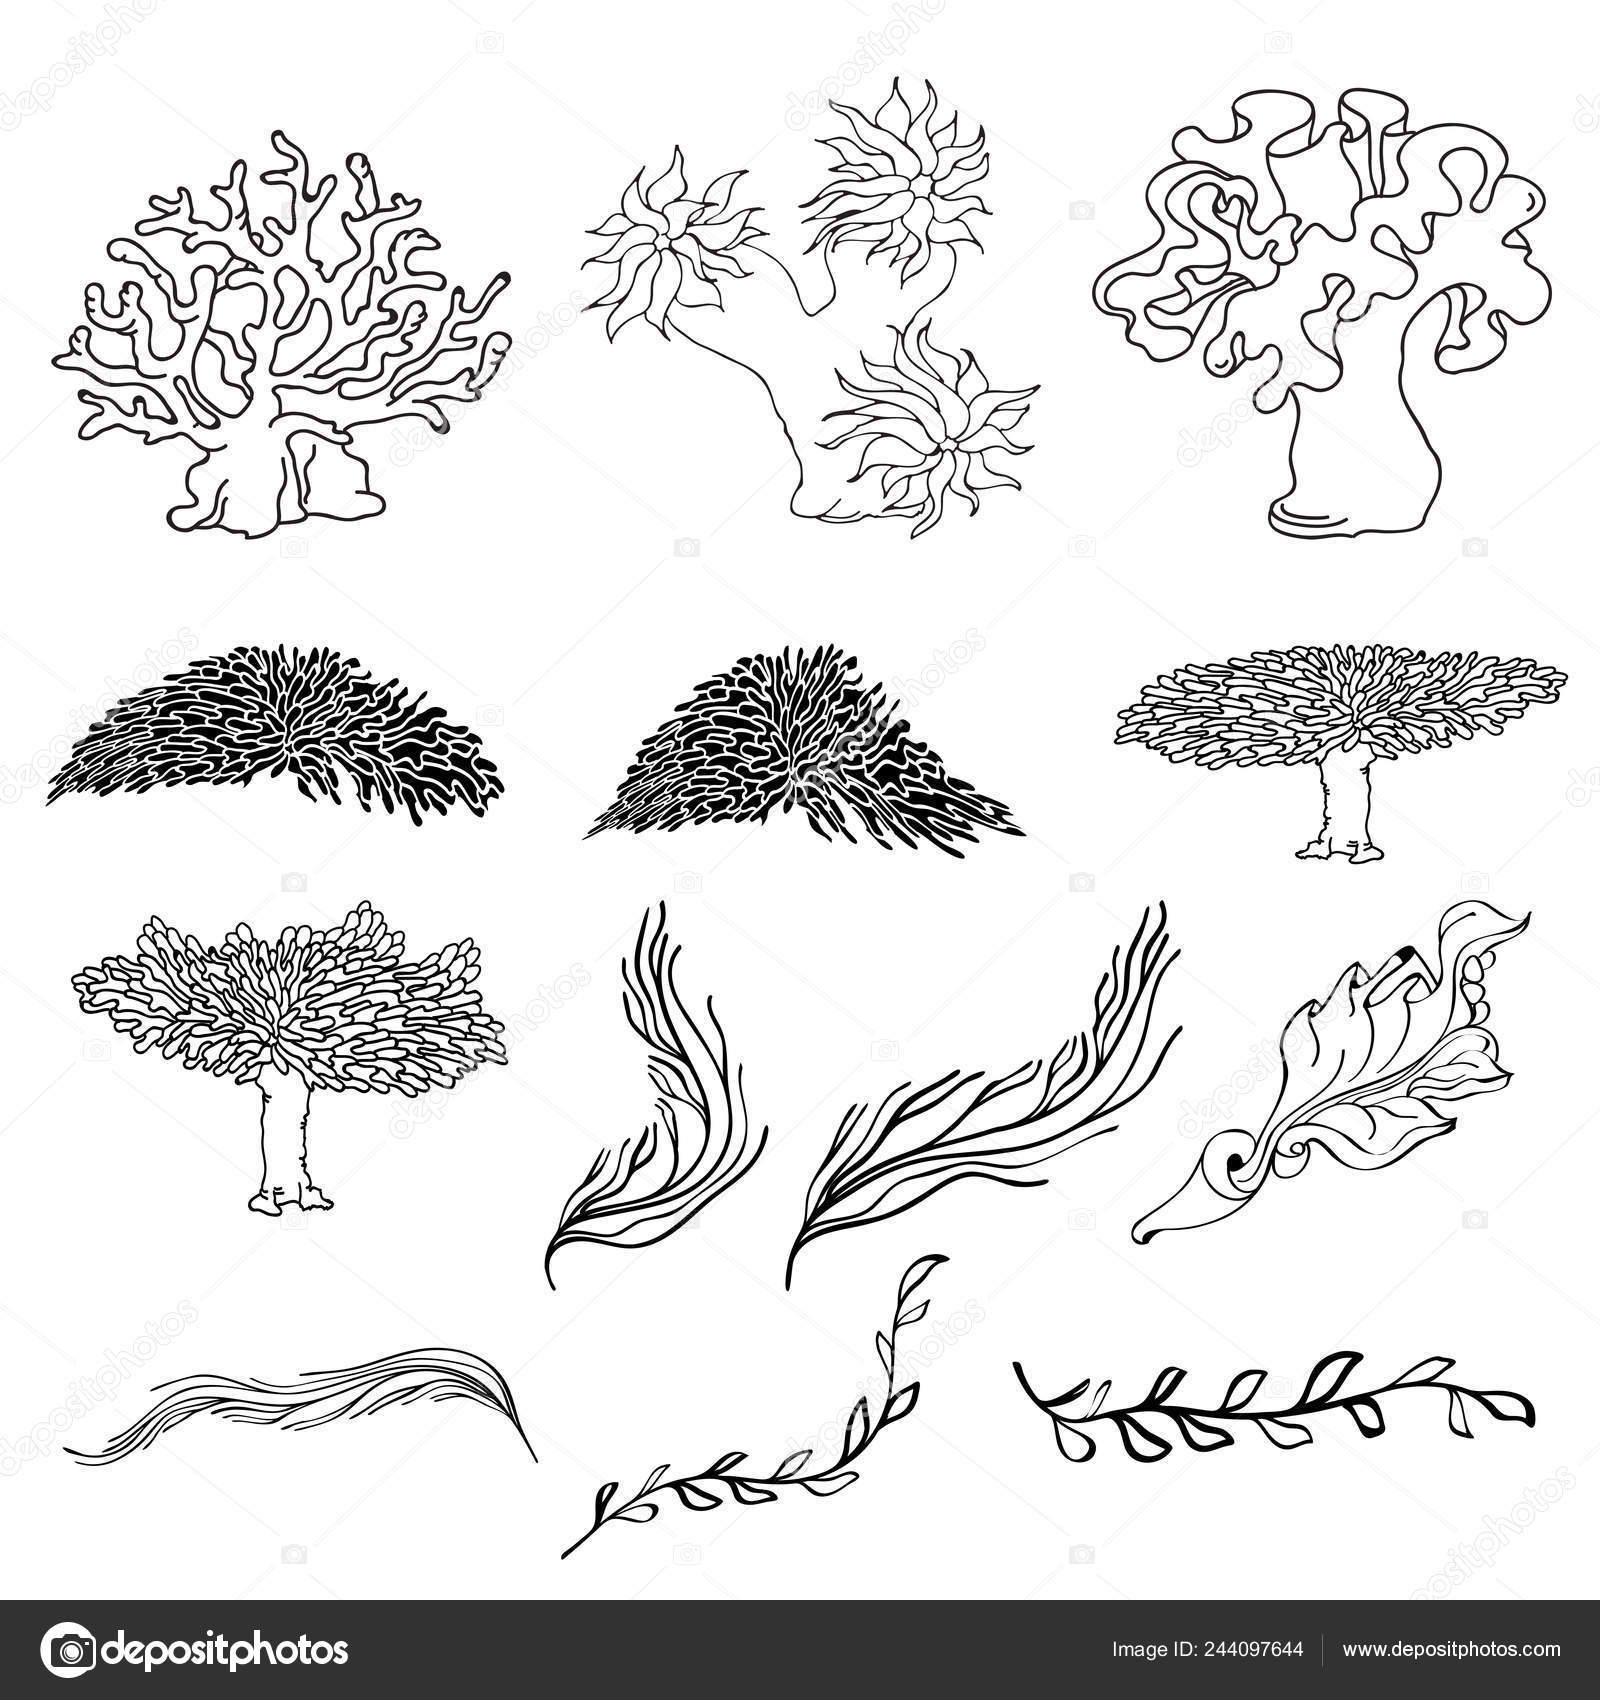 Top 91+ Images how to draw seaweed and coral step by step Updated